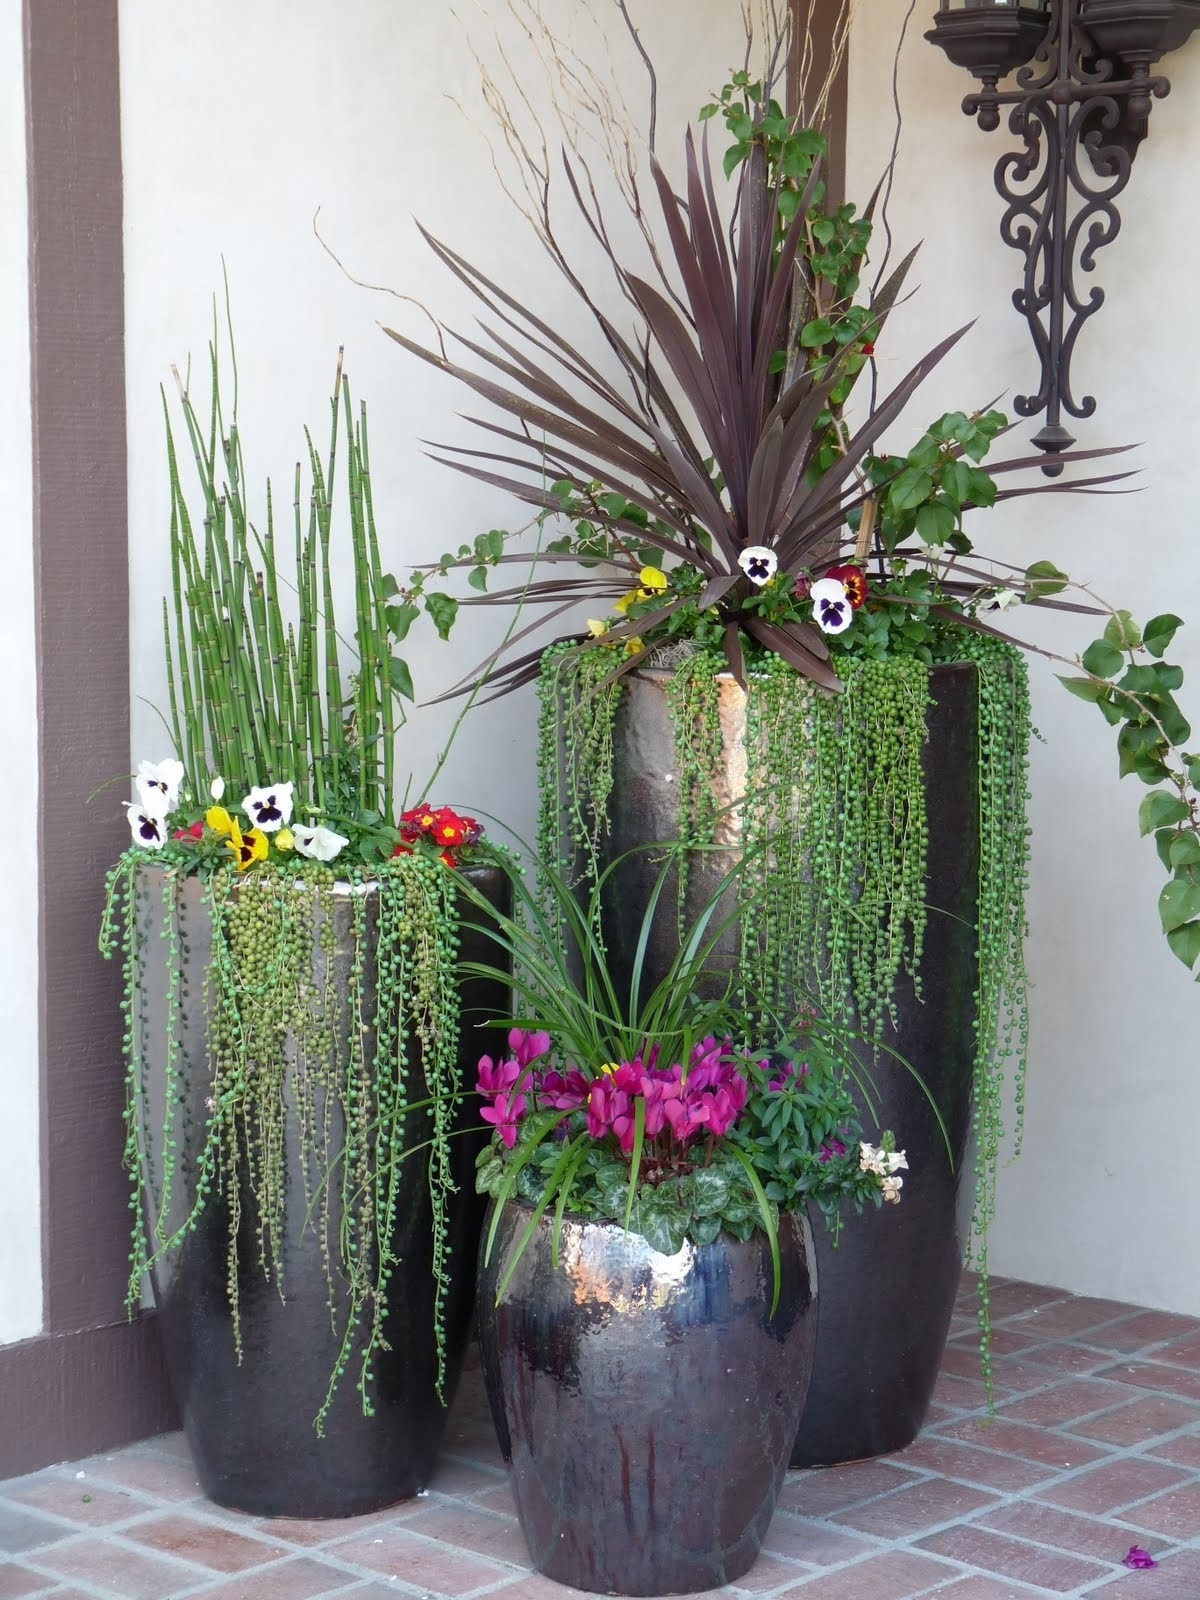 Plant Decor in Front of a House Stock Image - Image of natural, plant:  30932637